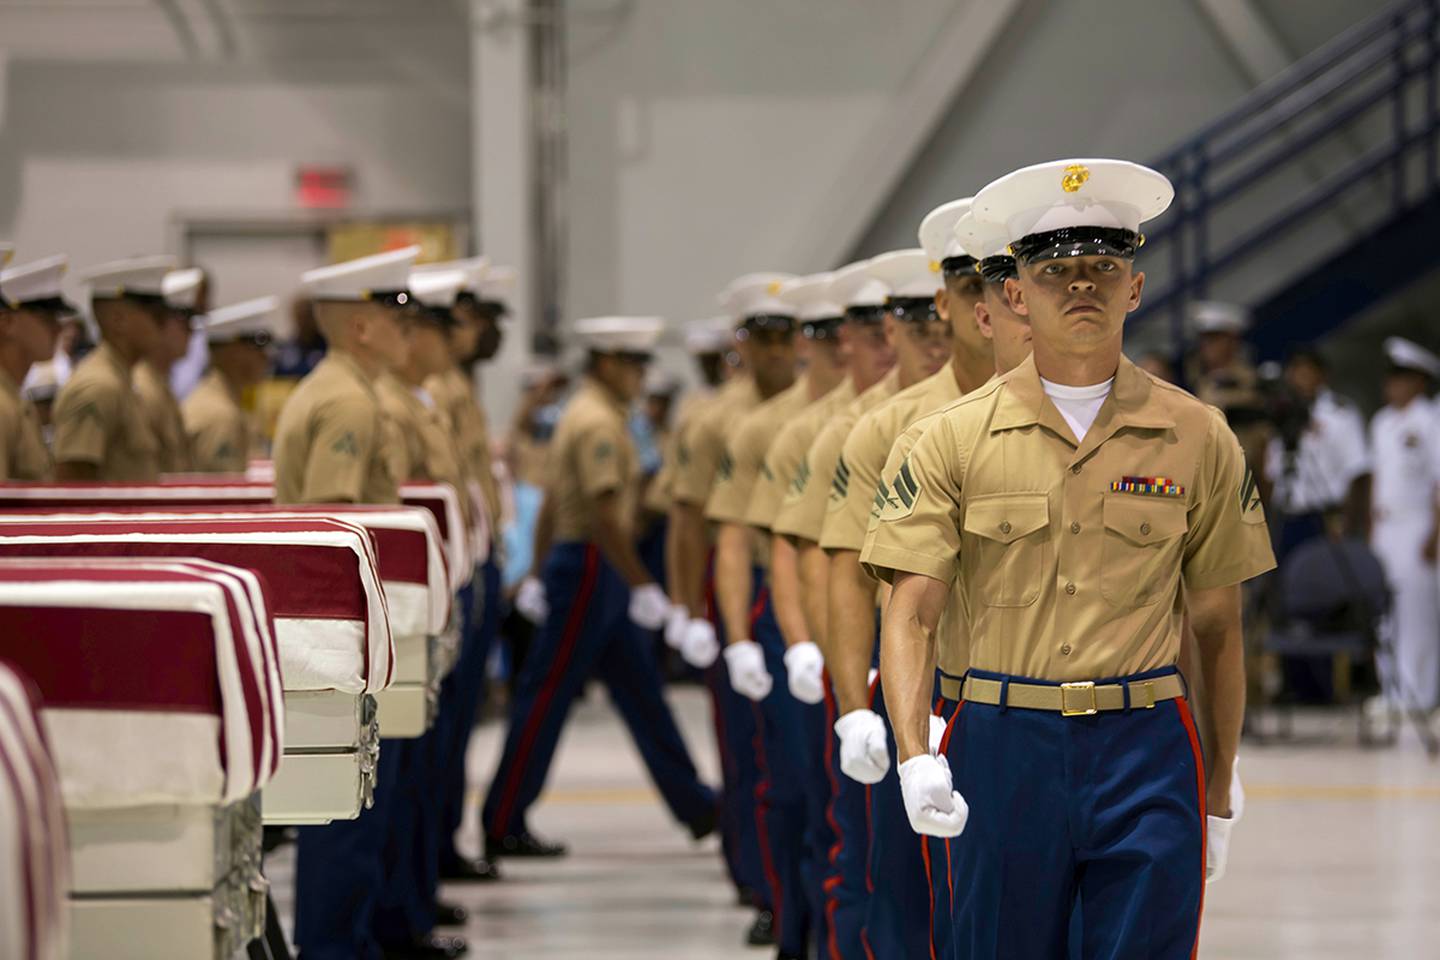 In this Wednesday, July 17, 2019 photo, Marines march past transfer cases carrying the possible remains of unidentified service members lost in the Battle of Tarawa during World War II in a hangar at Joint Base Pearl Harbor-Hickam in Hawaii.